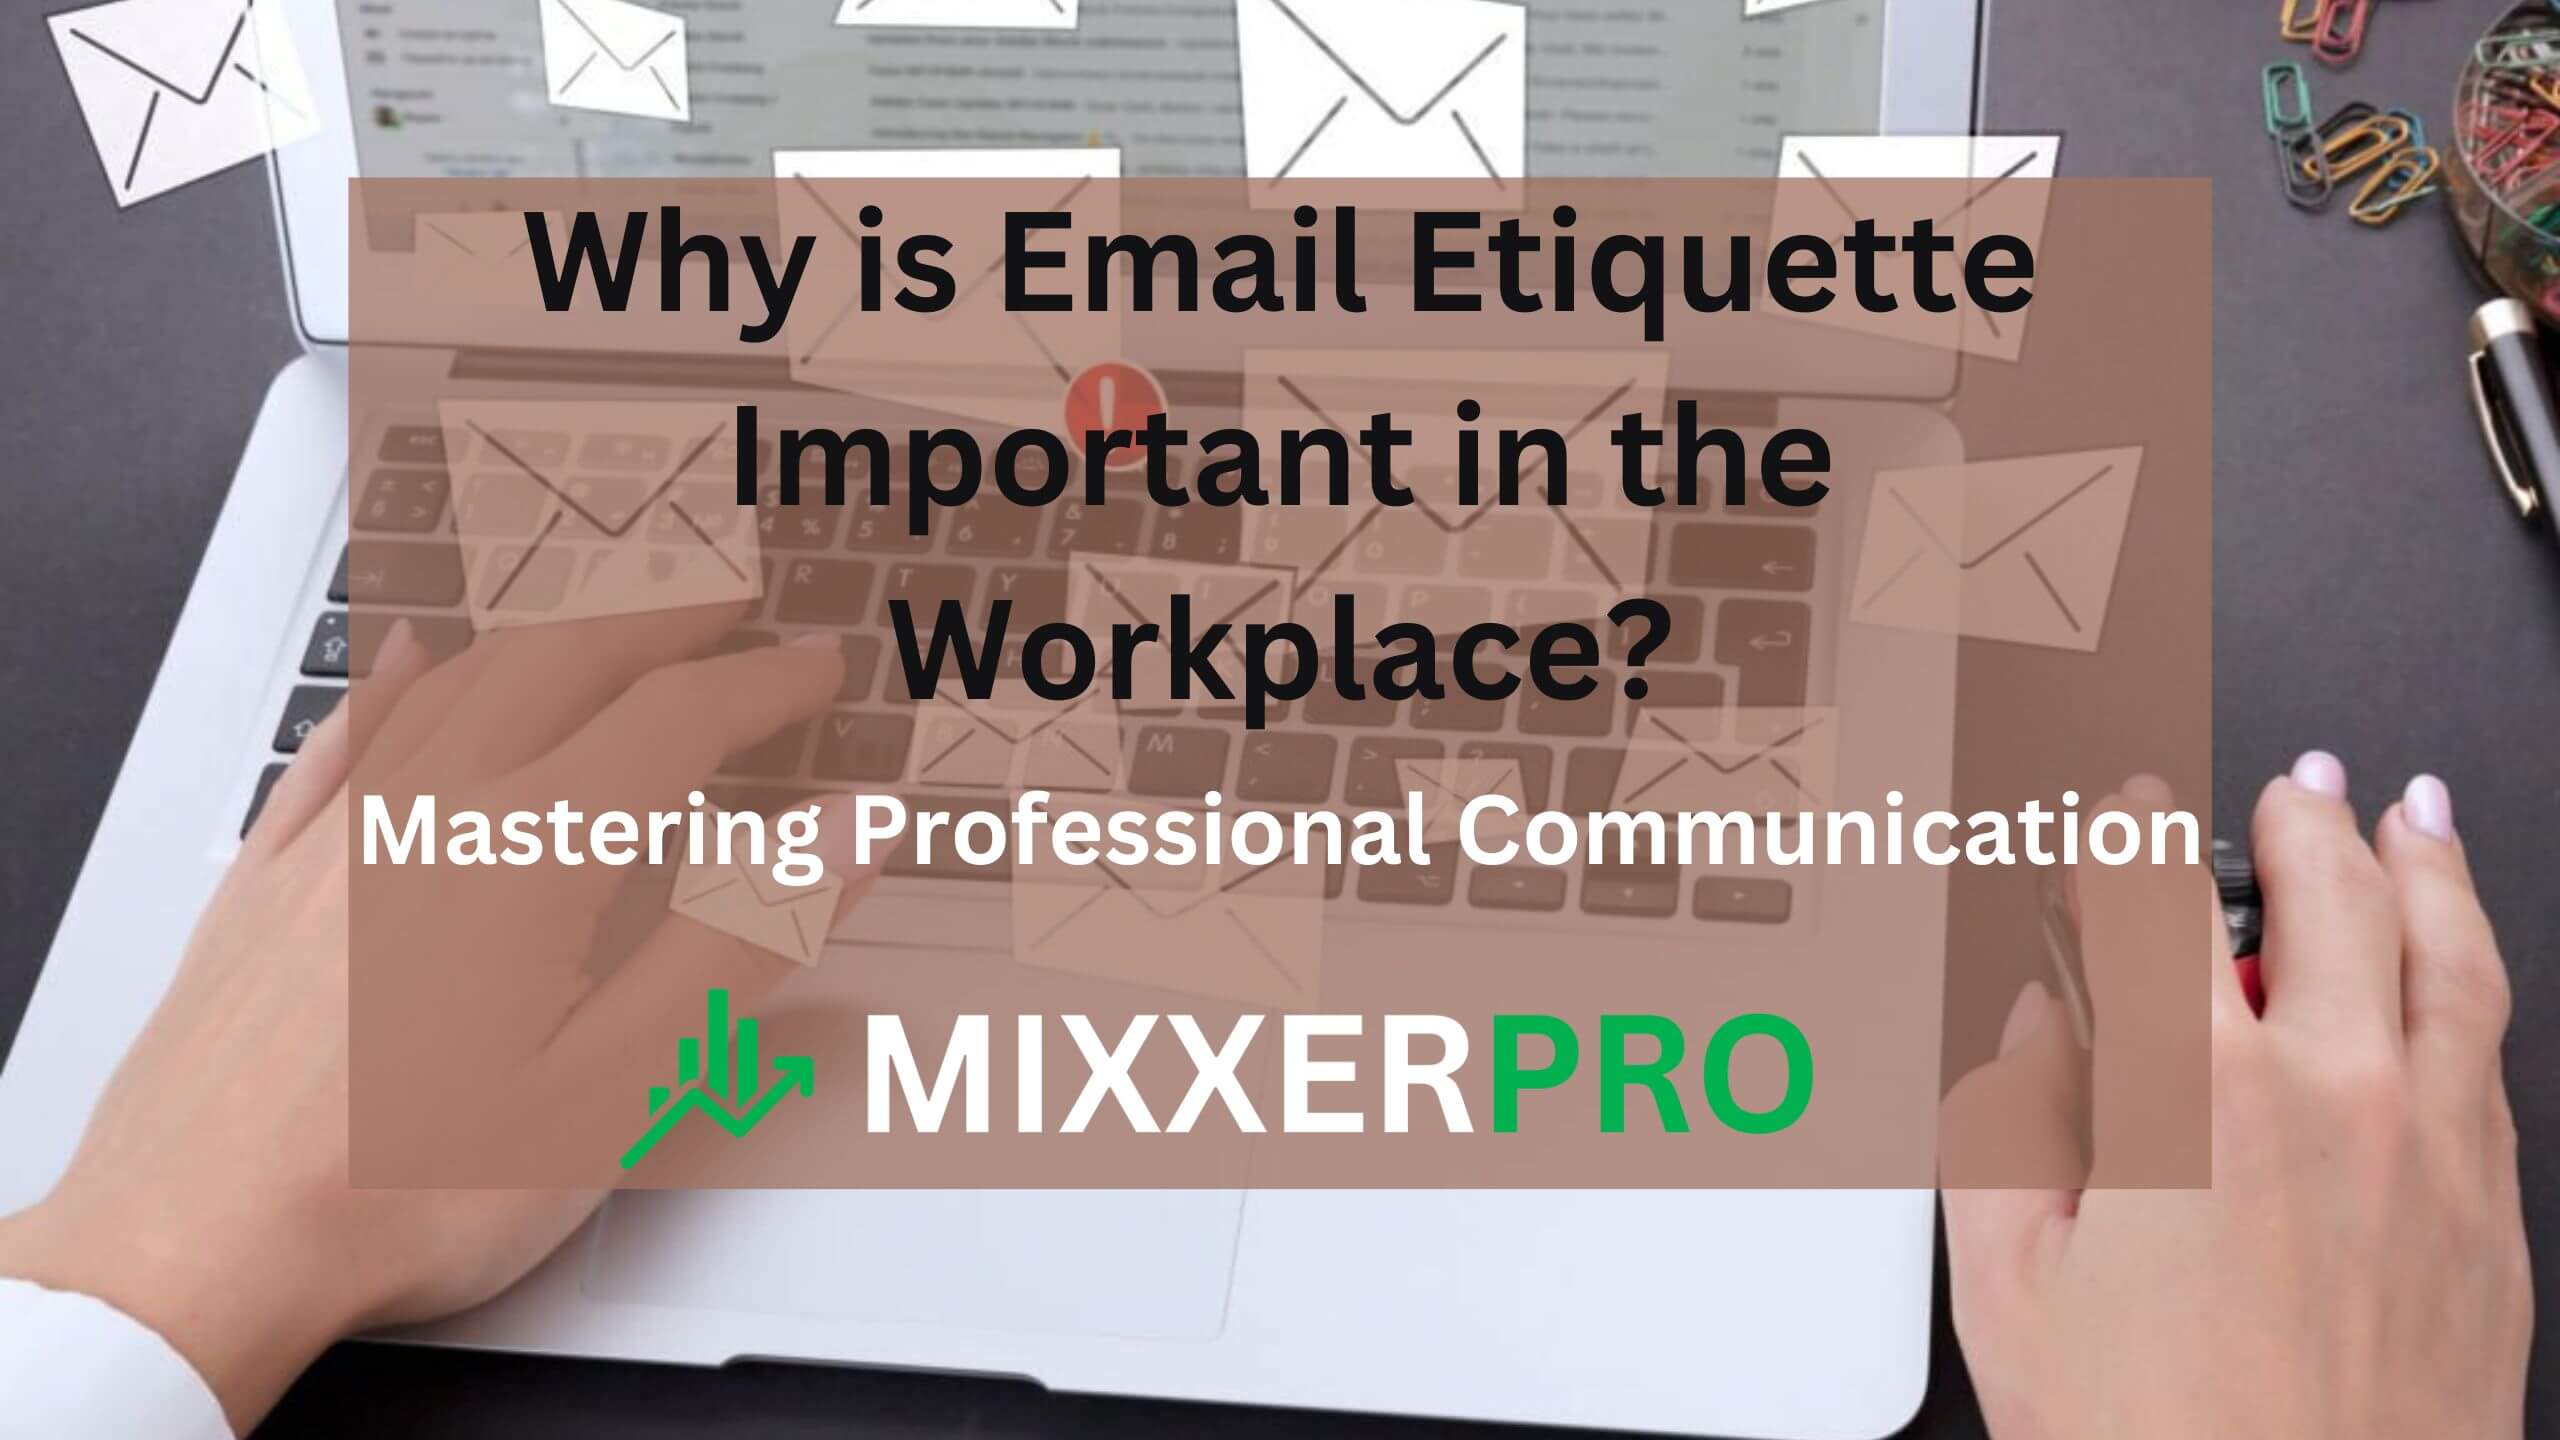 You are currently viewing Why is Email Etiquette Important in the Workplace? Mastering Professional Communication